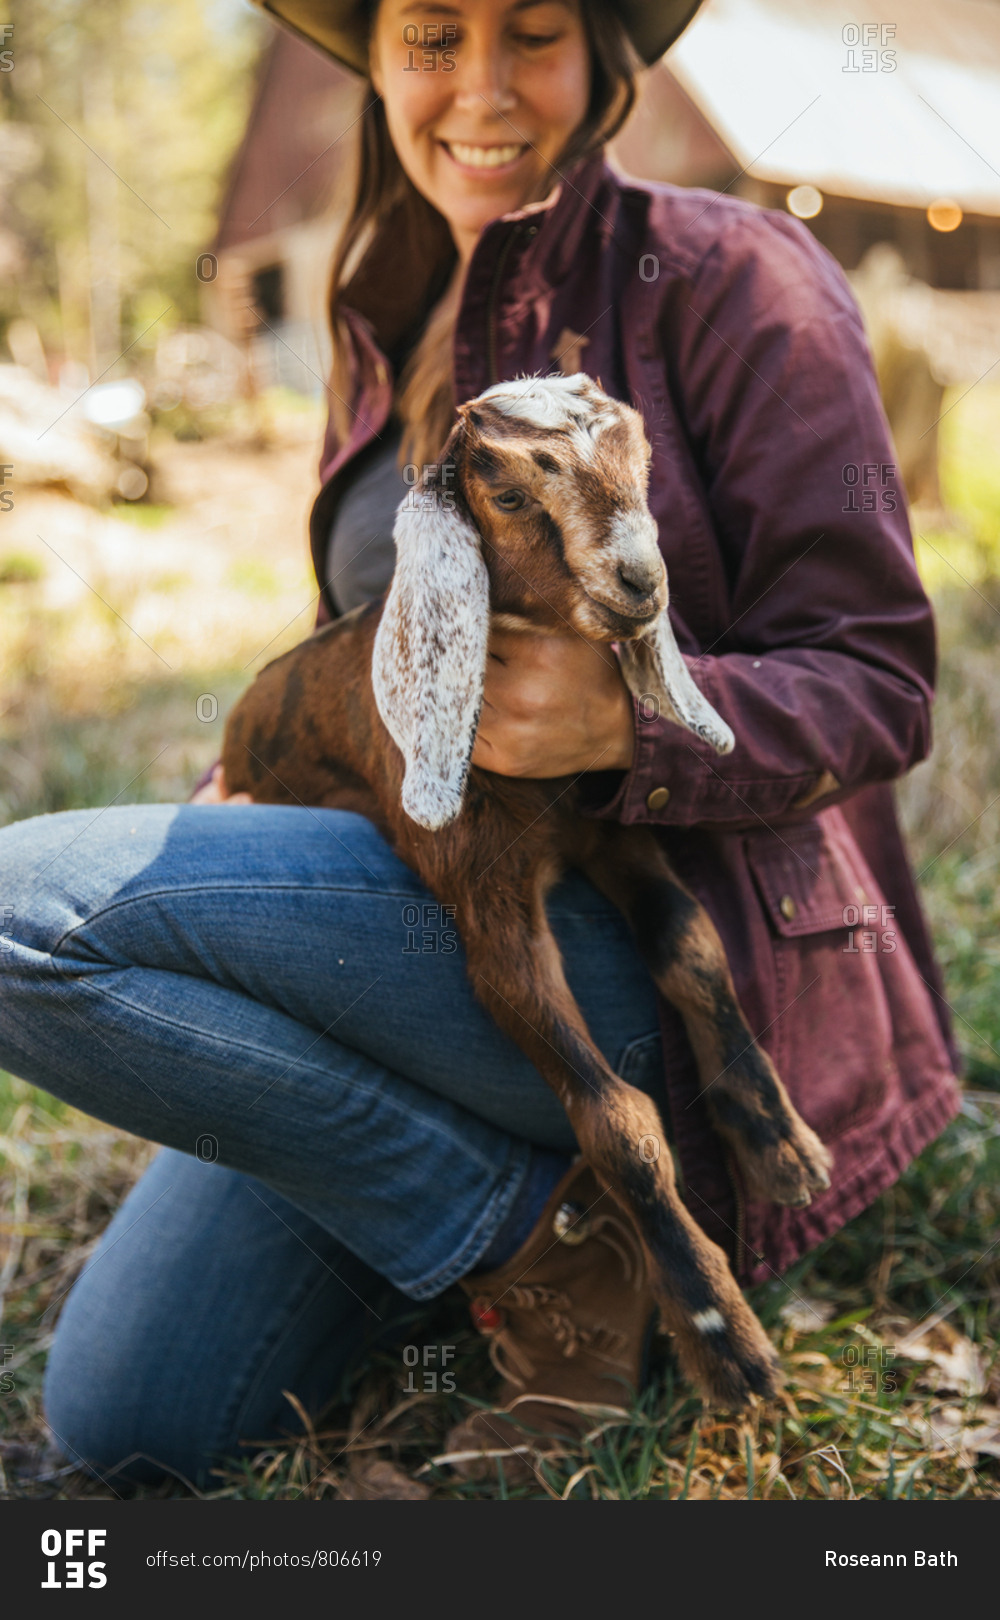 Smiling woman sitting down holding a baby goat.